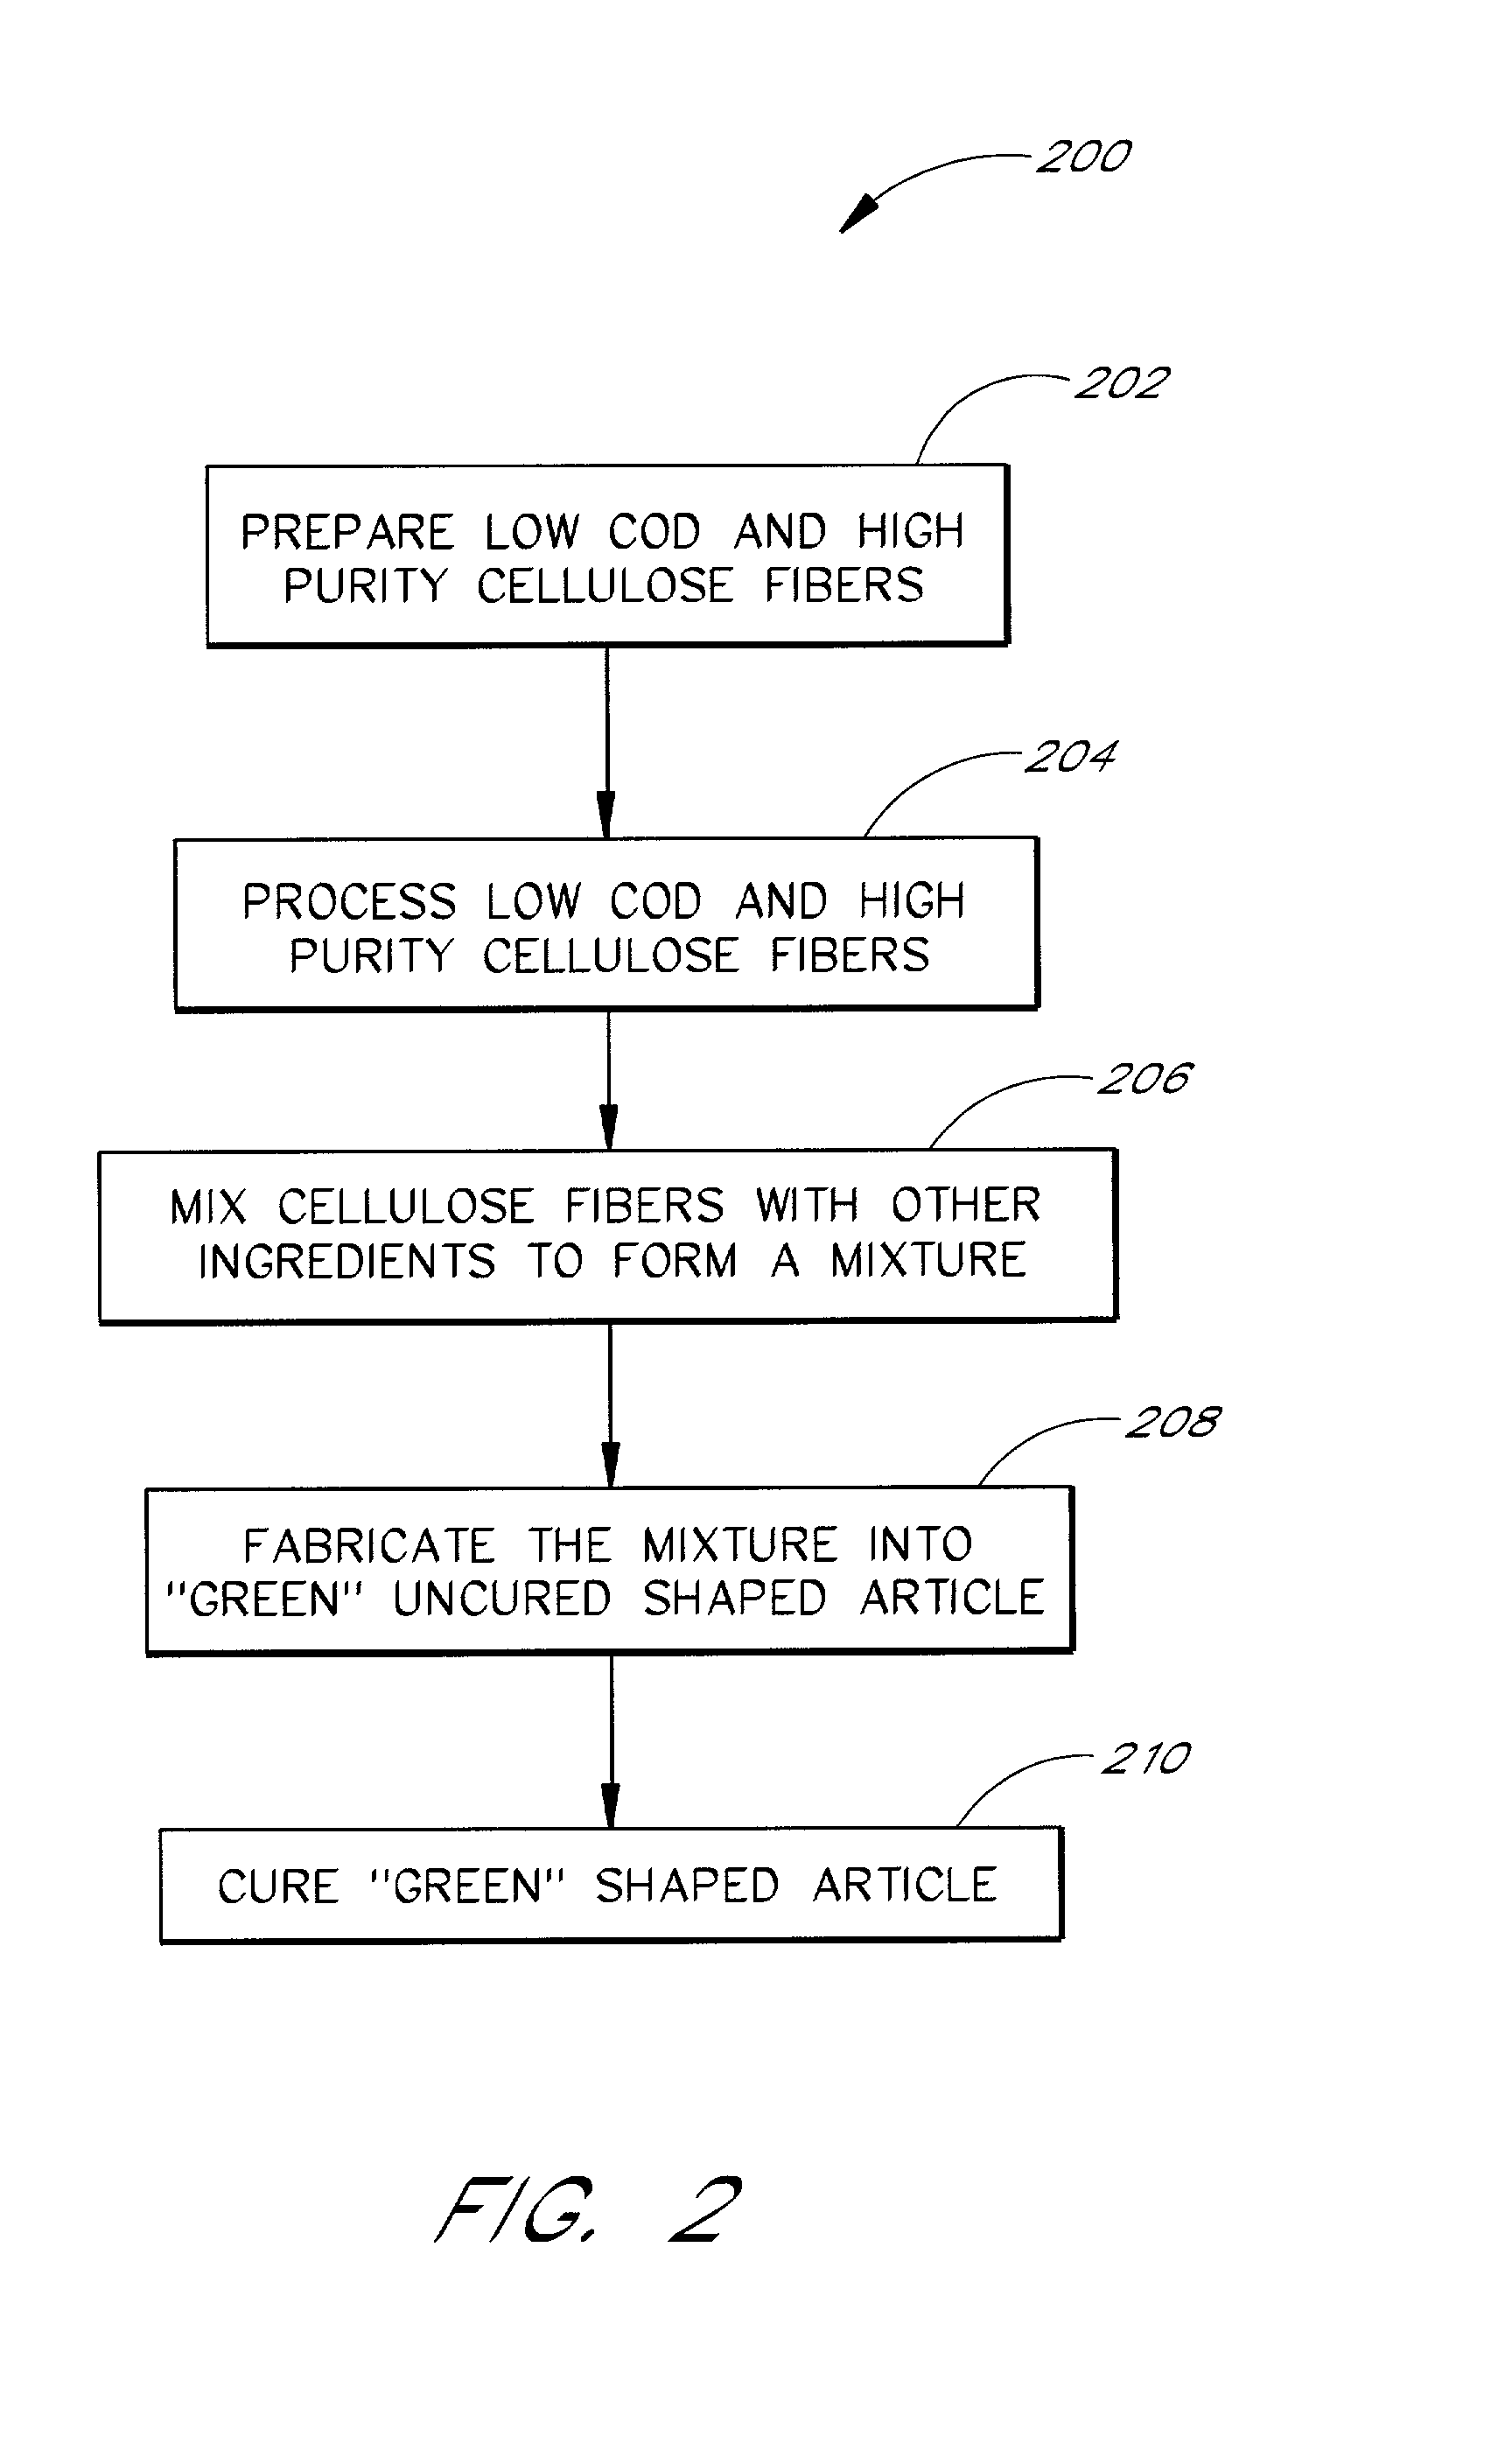 Method and apparatus for reducing impurities in cellulose fibers for manufacture of fiber reinforced cement composite materials